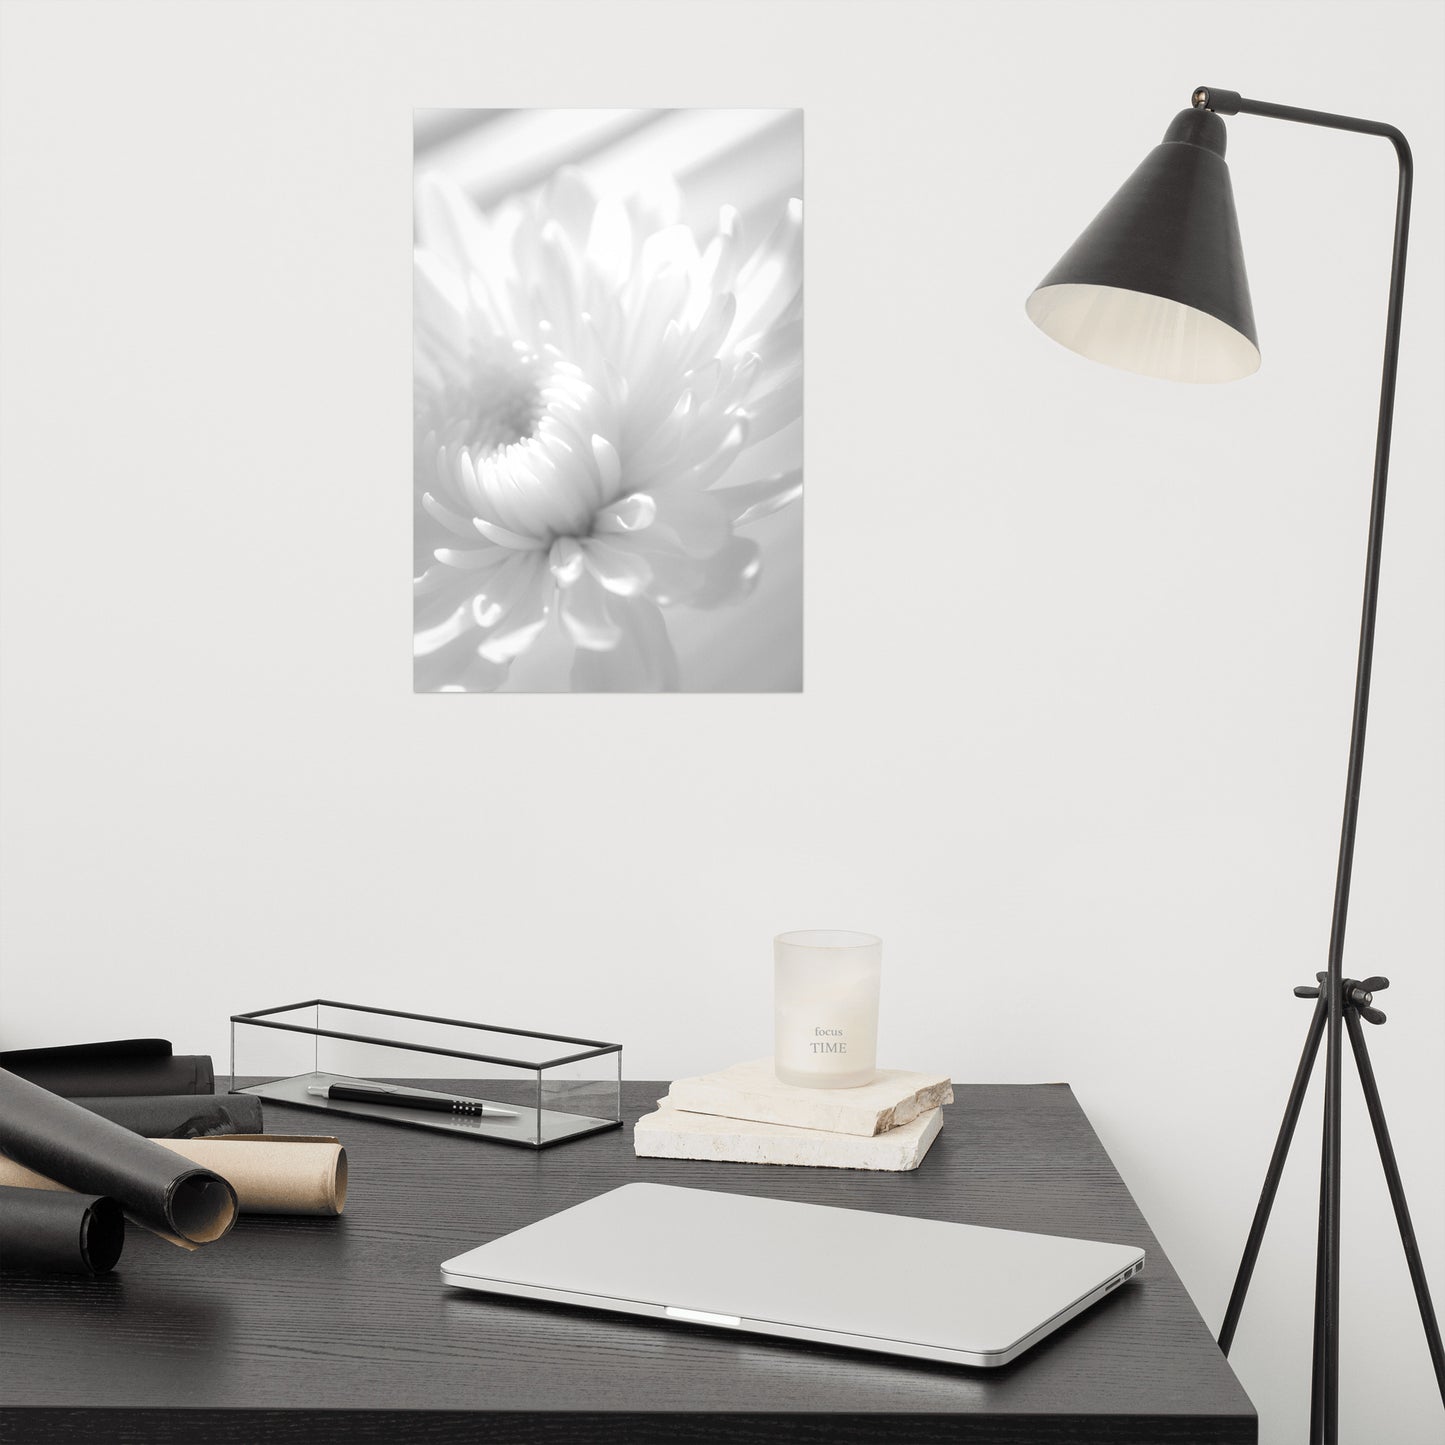 Infrared Flower Black and White Floral Nature Photo Loose Unframed Wall Art Prints